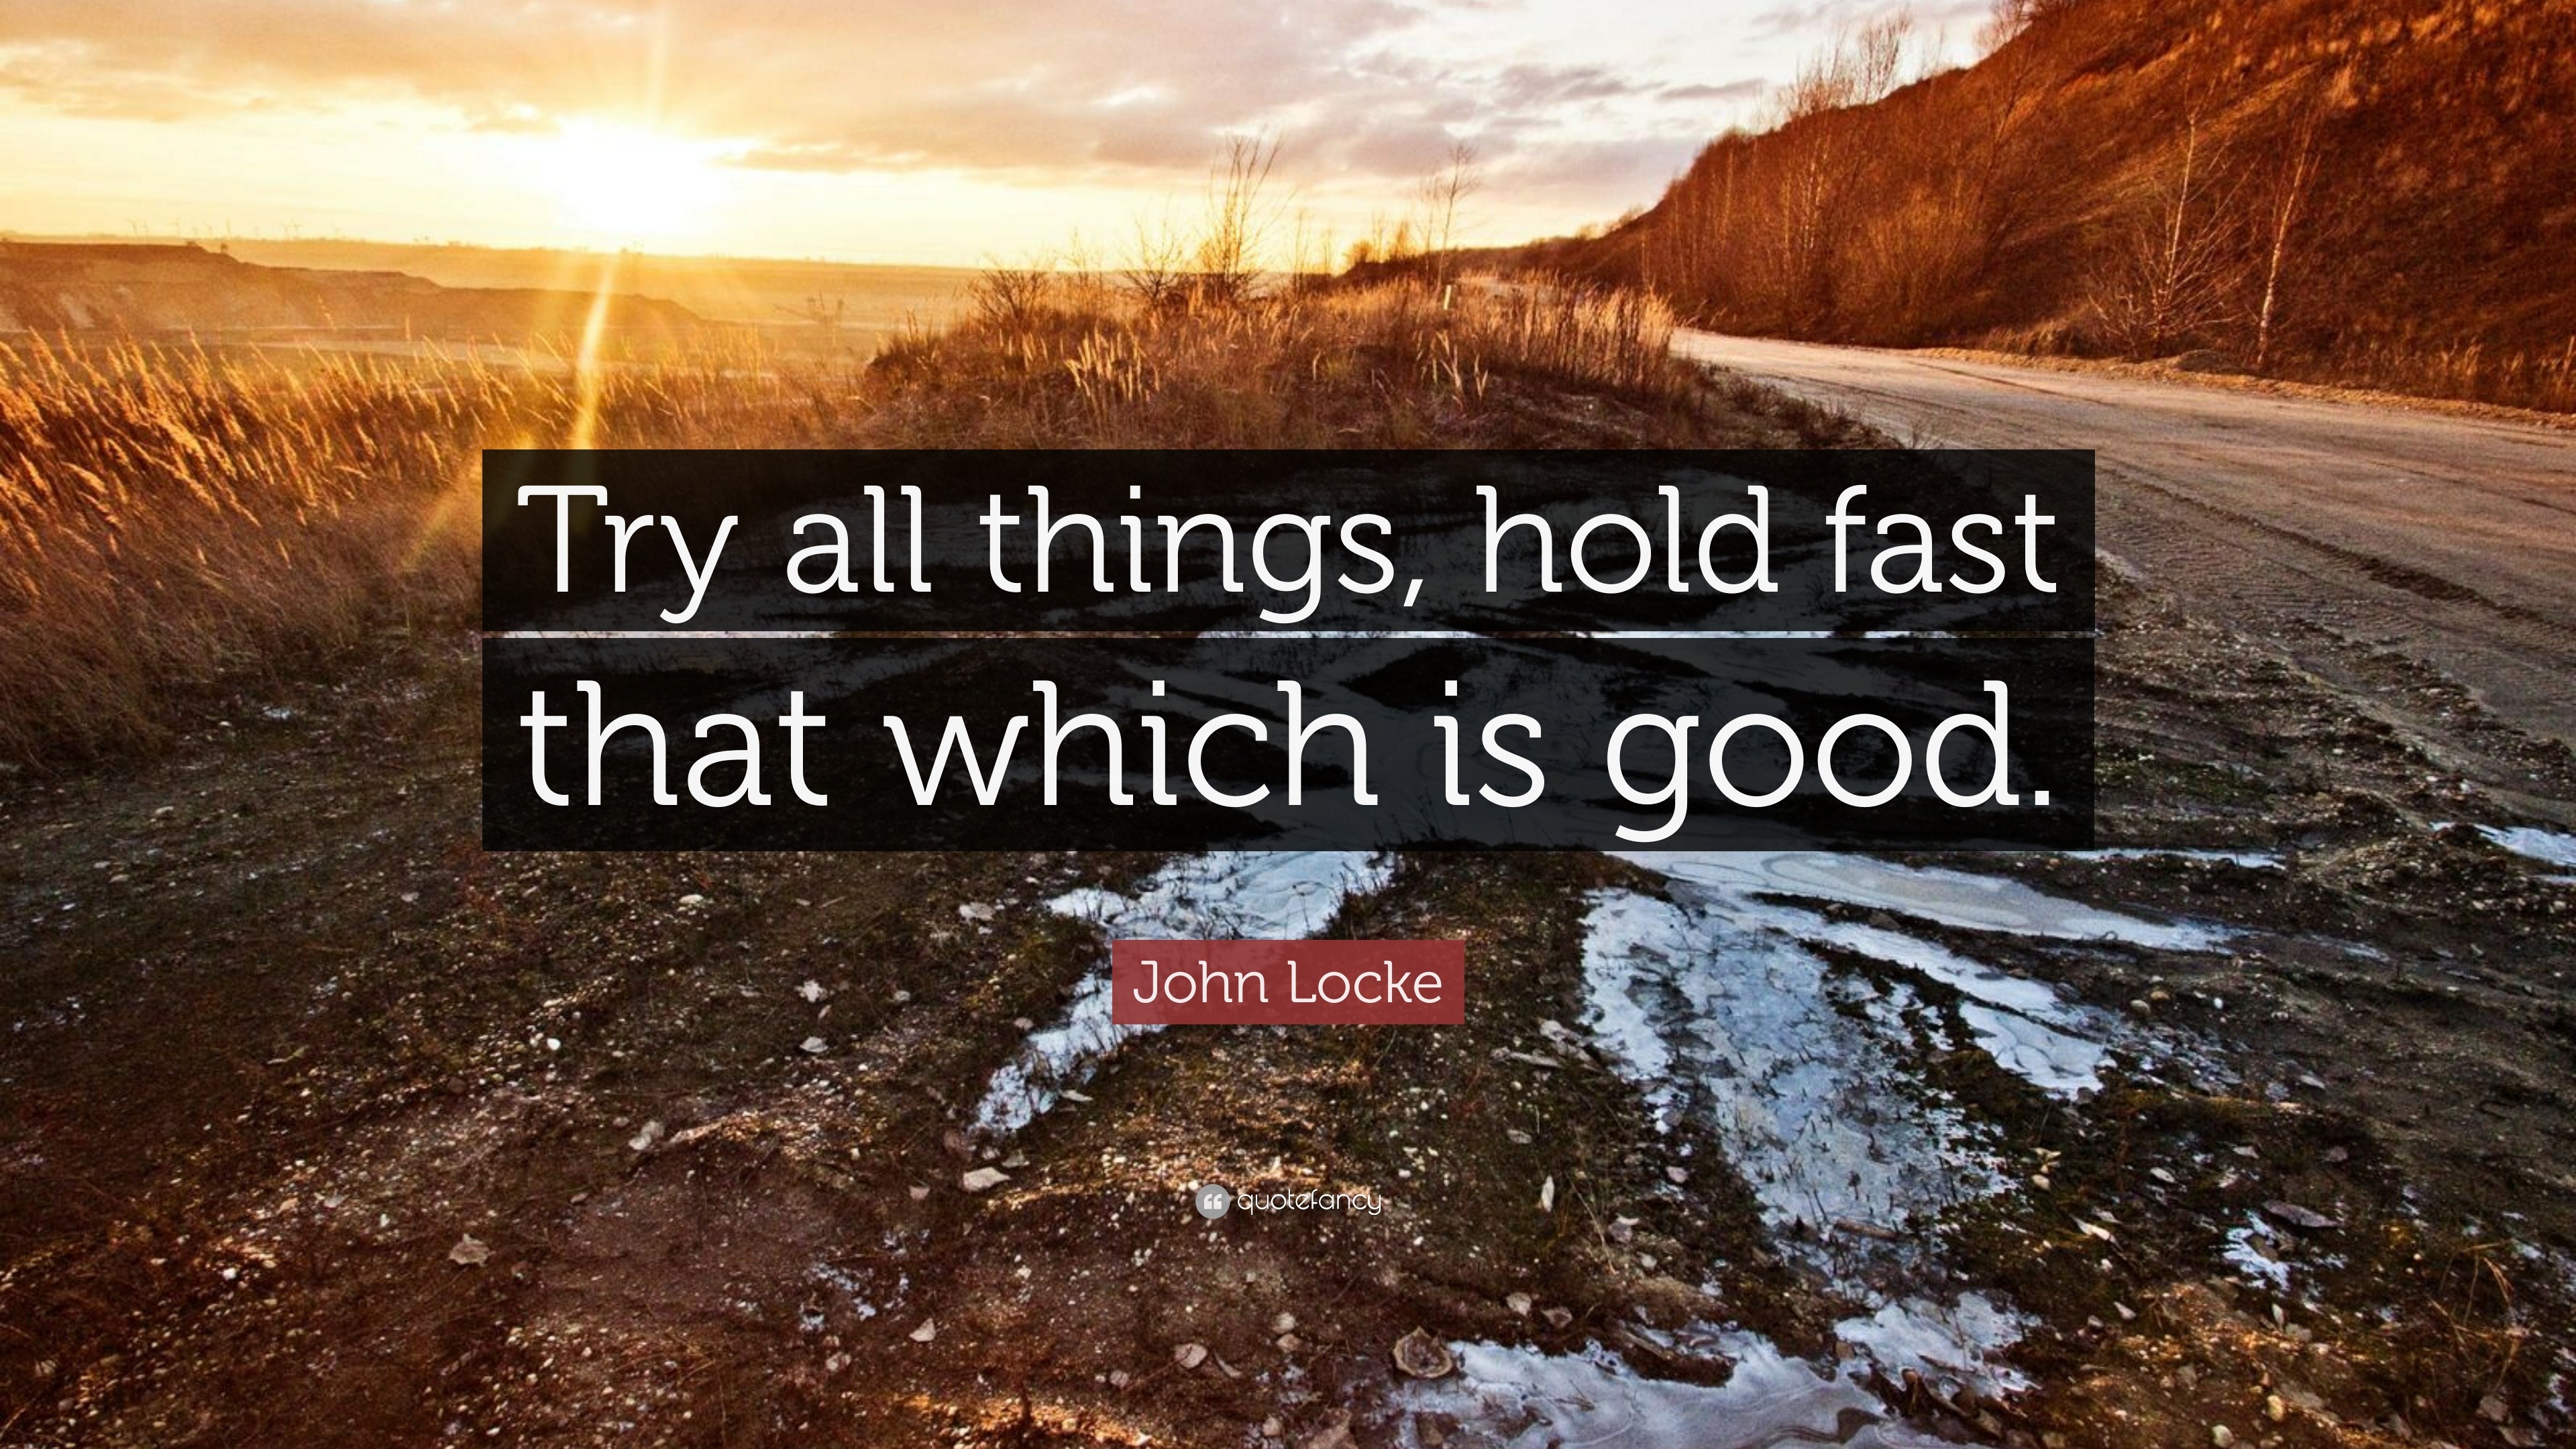 John Locke Quote: “Try all things, hold fast that which is good.”